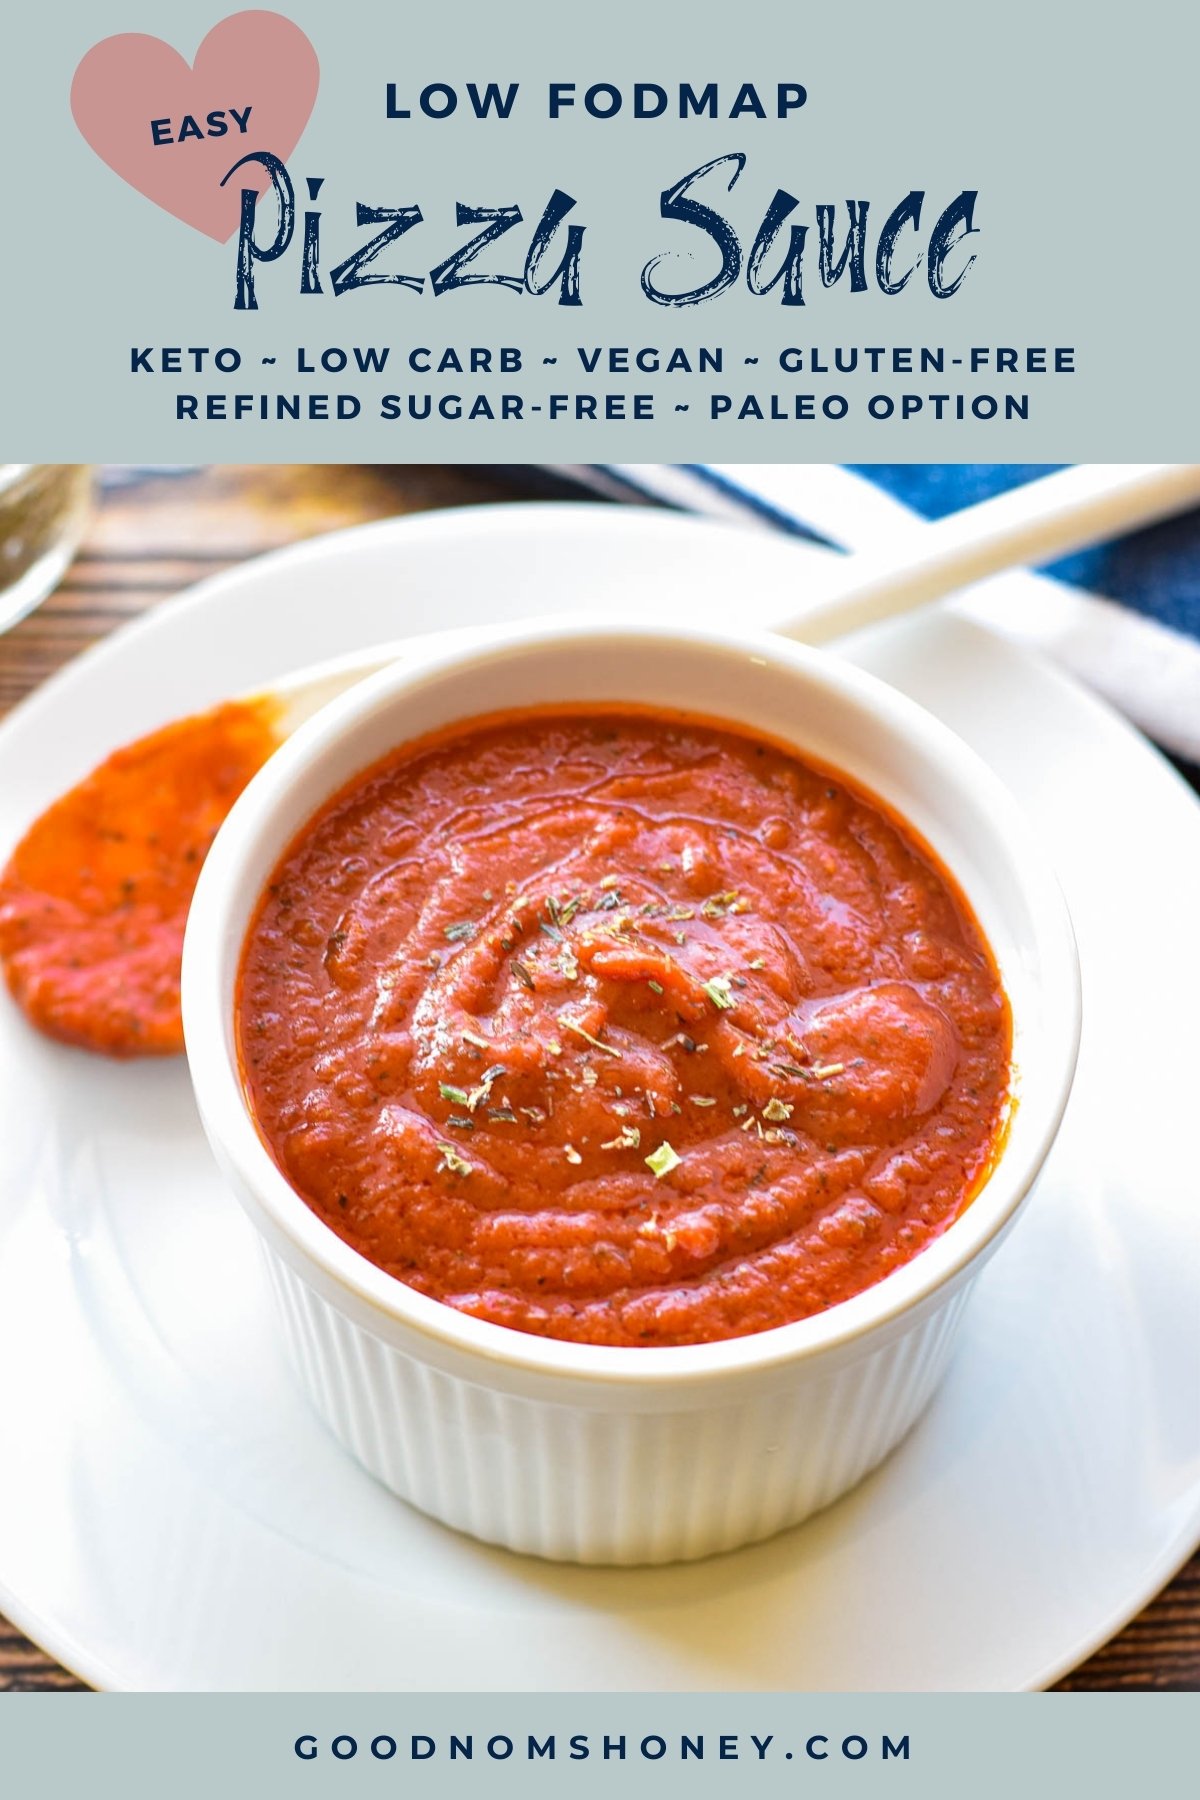 pinterest image with easy low fodmap pizza sauce keto low carb vegan gluten-free refined sugar-free paleo option at the top and goodnomshoney.com at the bottom